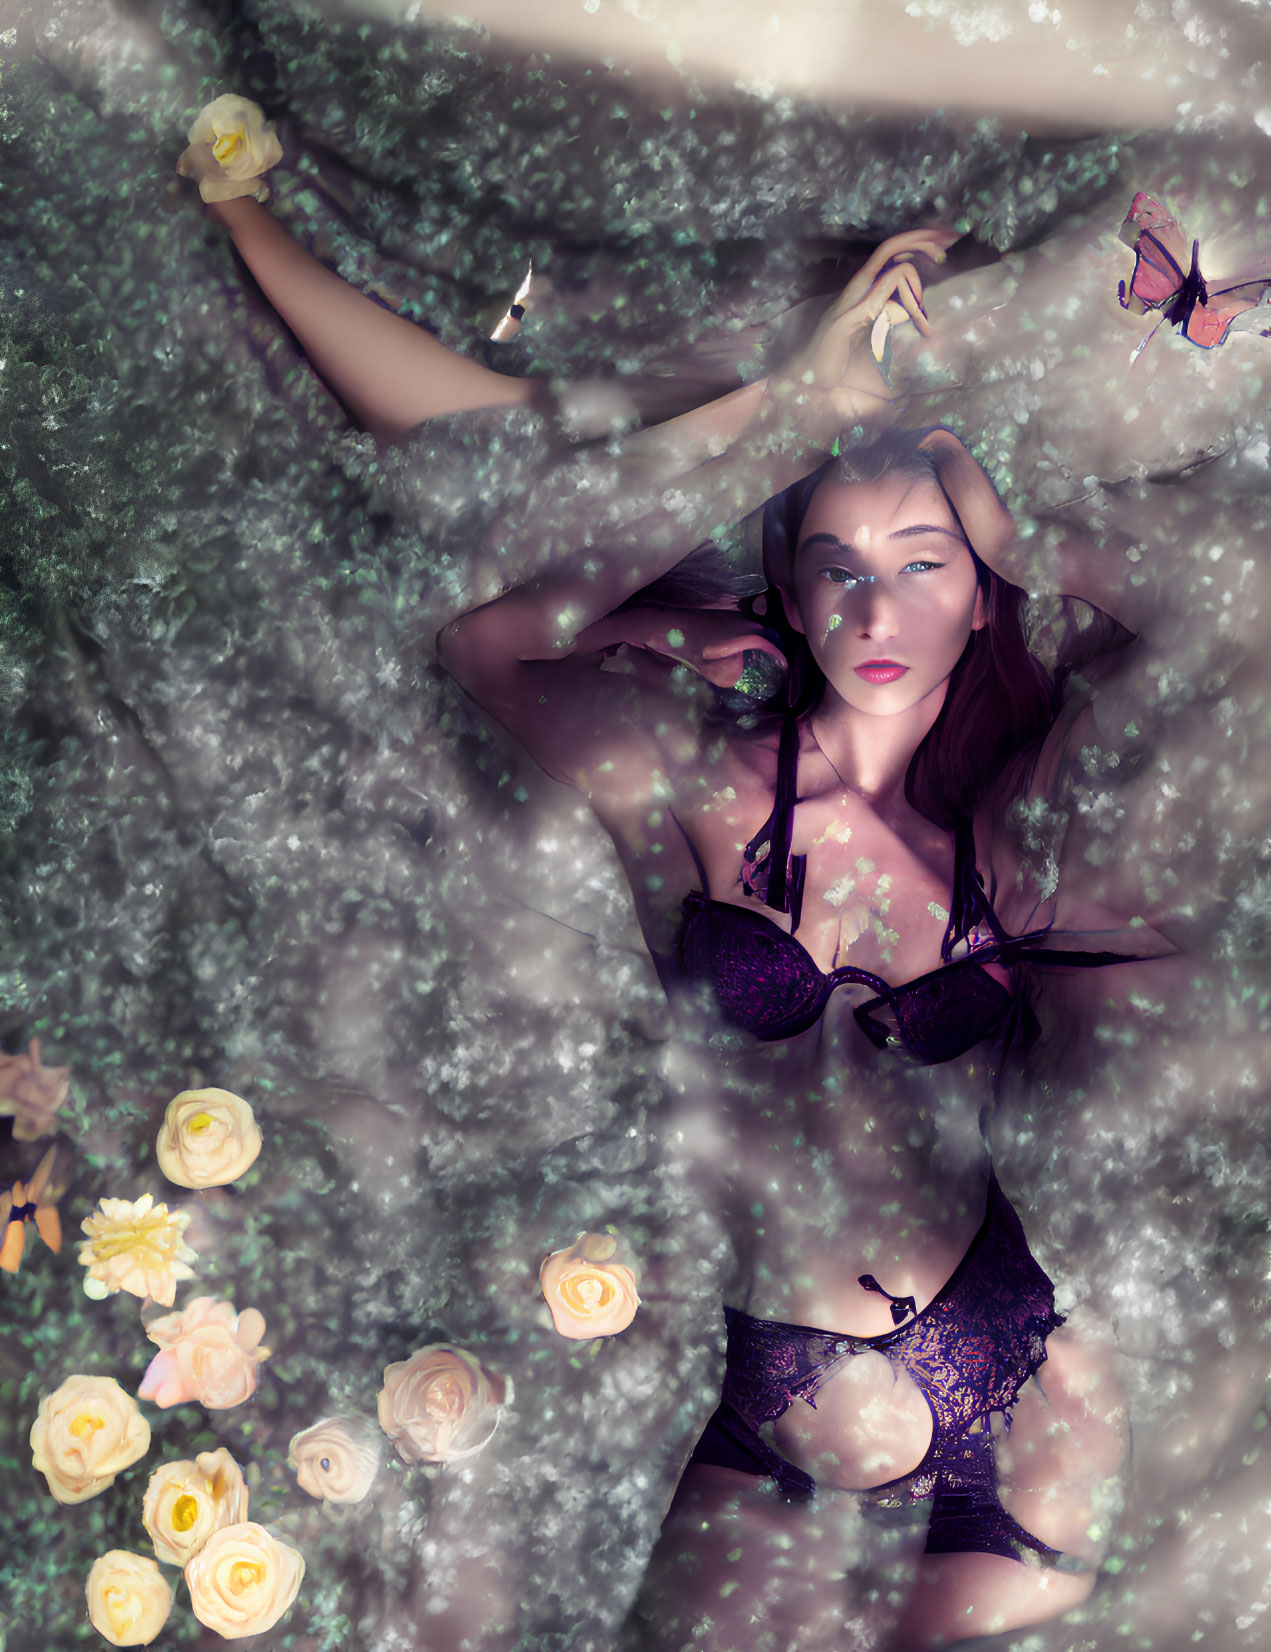 Woman in Dark Lingerie Surrounded by Flowers and Butterflies